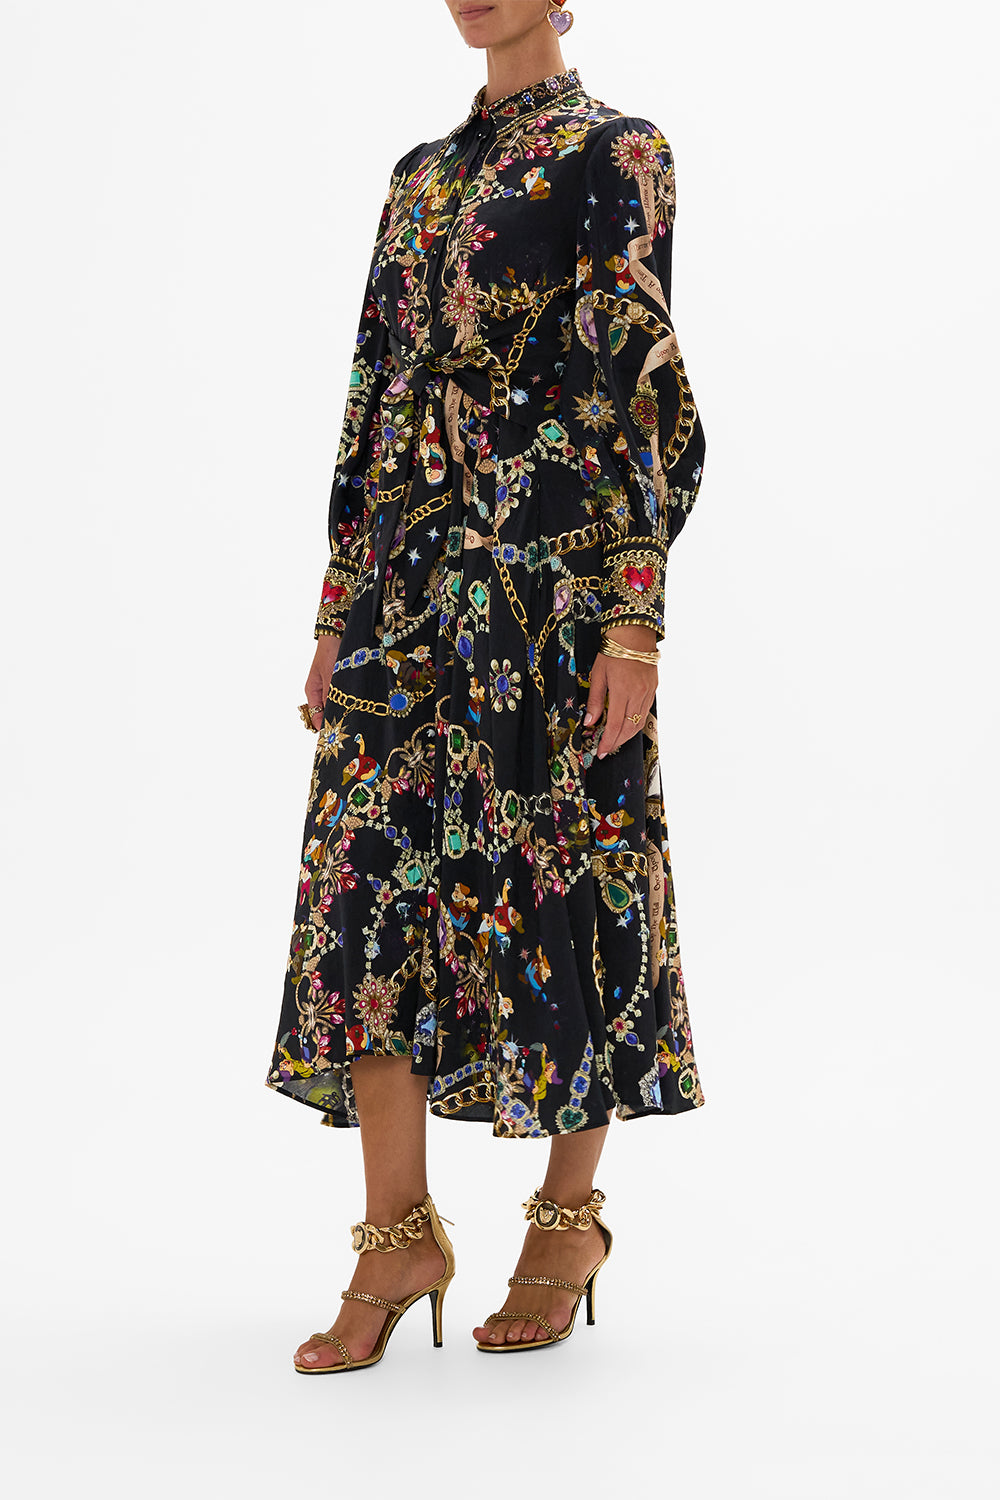 Disney CAMILLA silk shirt dress in Happily Ever After print